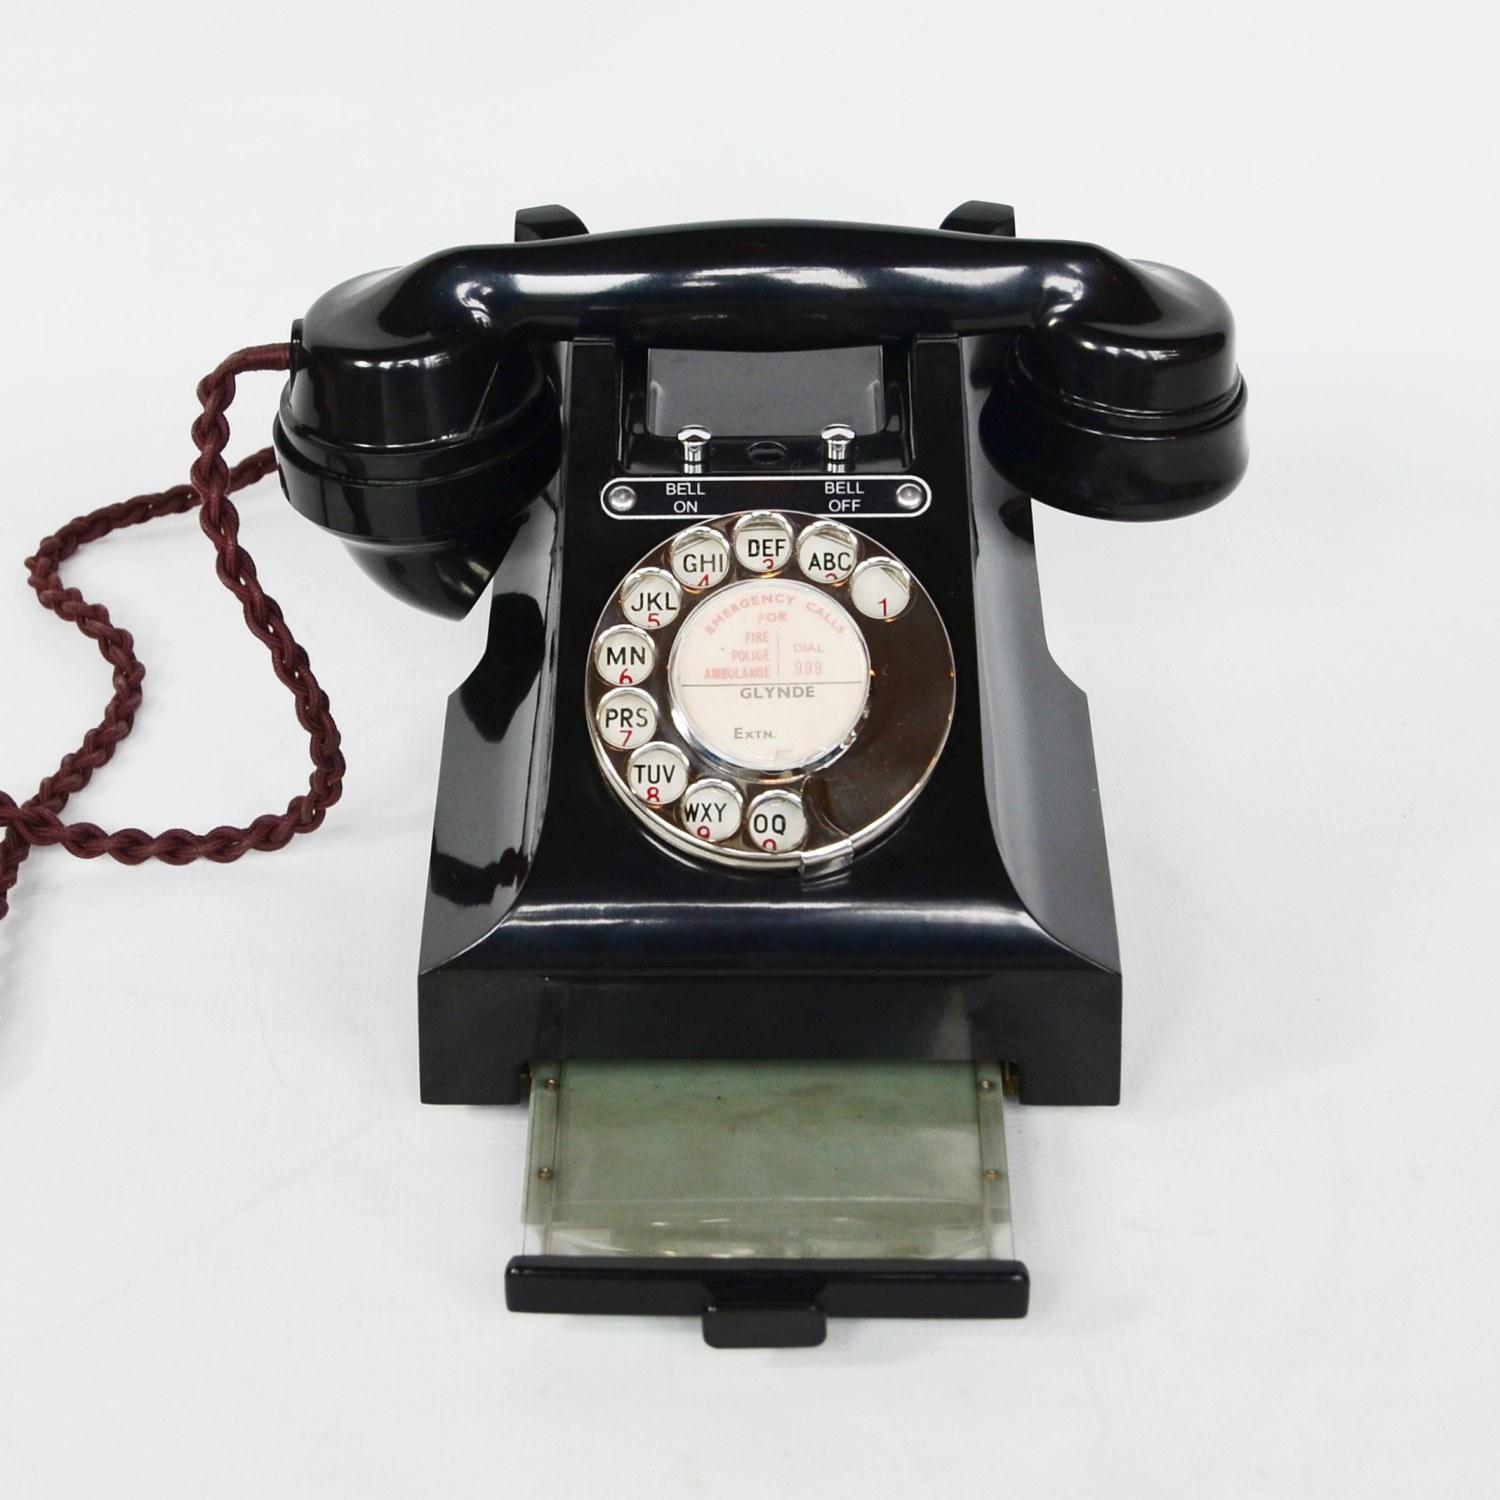 An original GPO model 328L telephone. Black Bakelite with integral drawer and braided handset cord. Registered number to face. Bell on or bell off buttons.

Dimensions: H 15cm, W 20cm, D 16cm

Origin: English

Date: 1948

Item No: